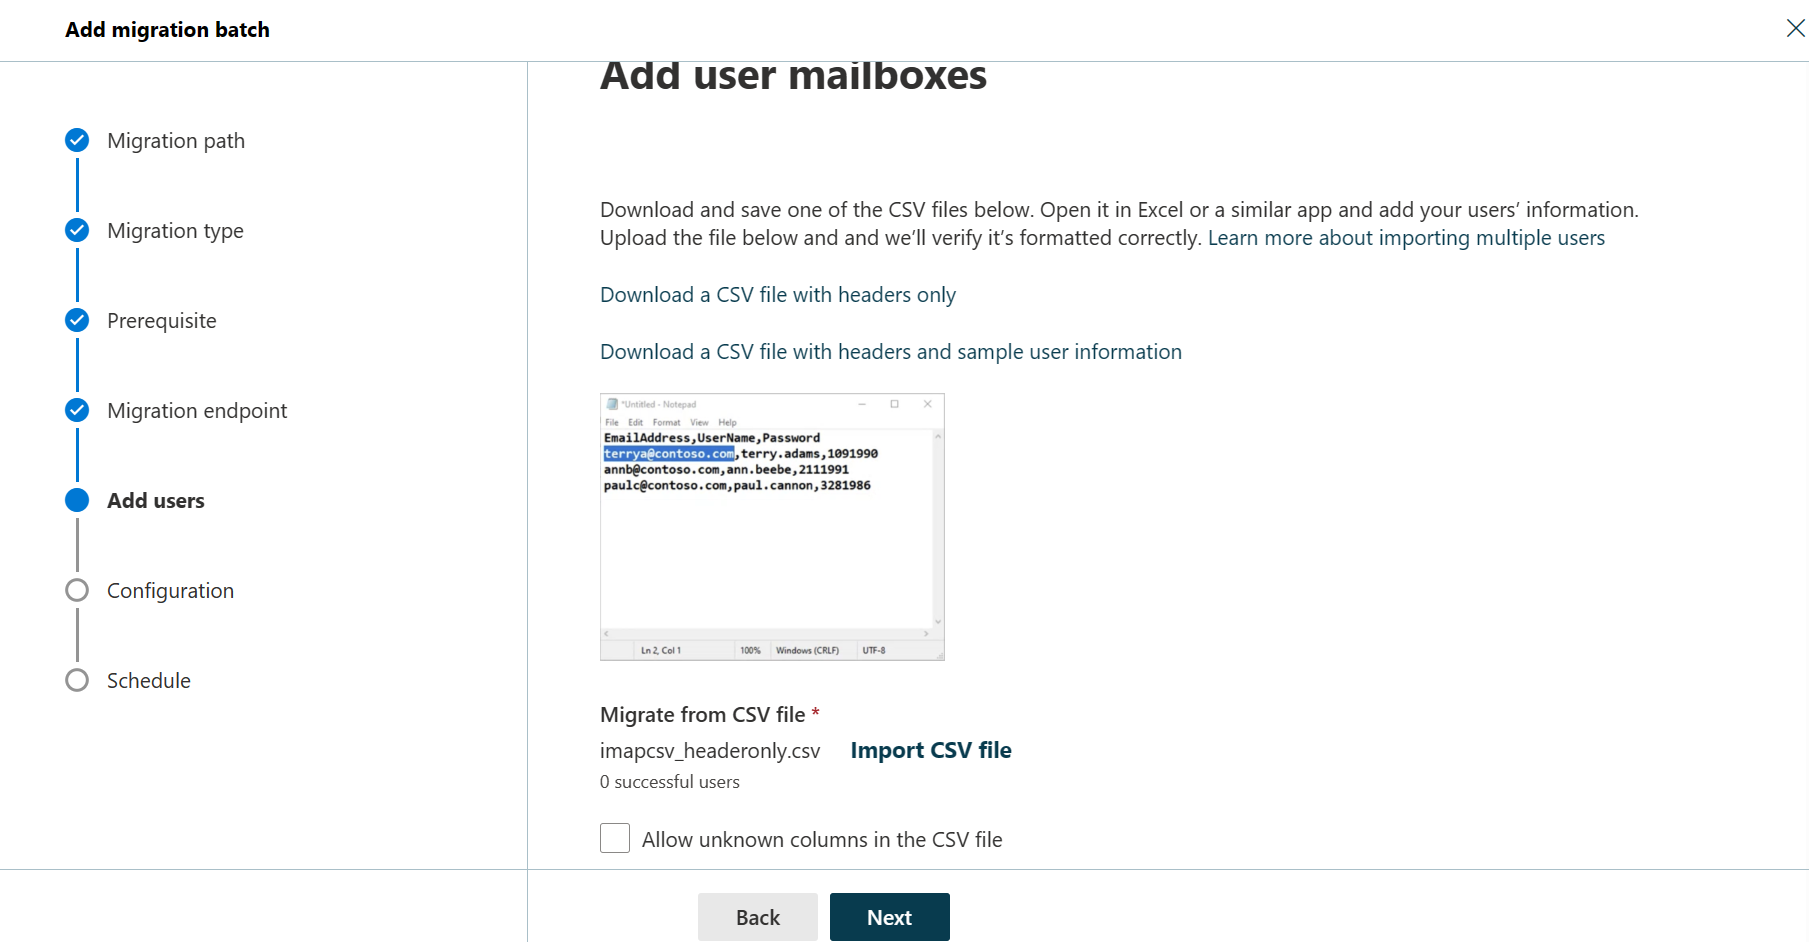 Screenshot of the fifth step of the Add migration batch wizard where the user can add user mailboxes.